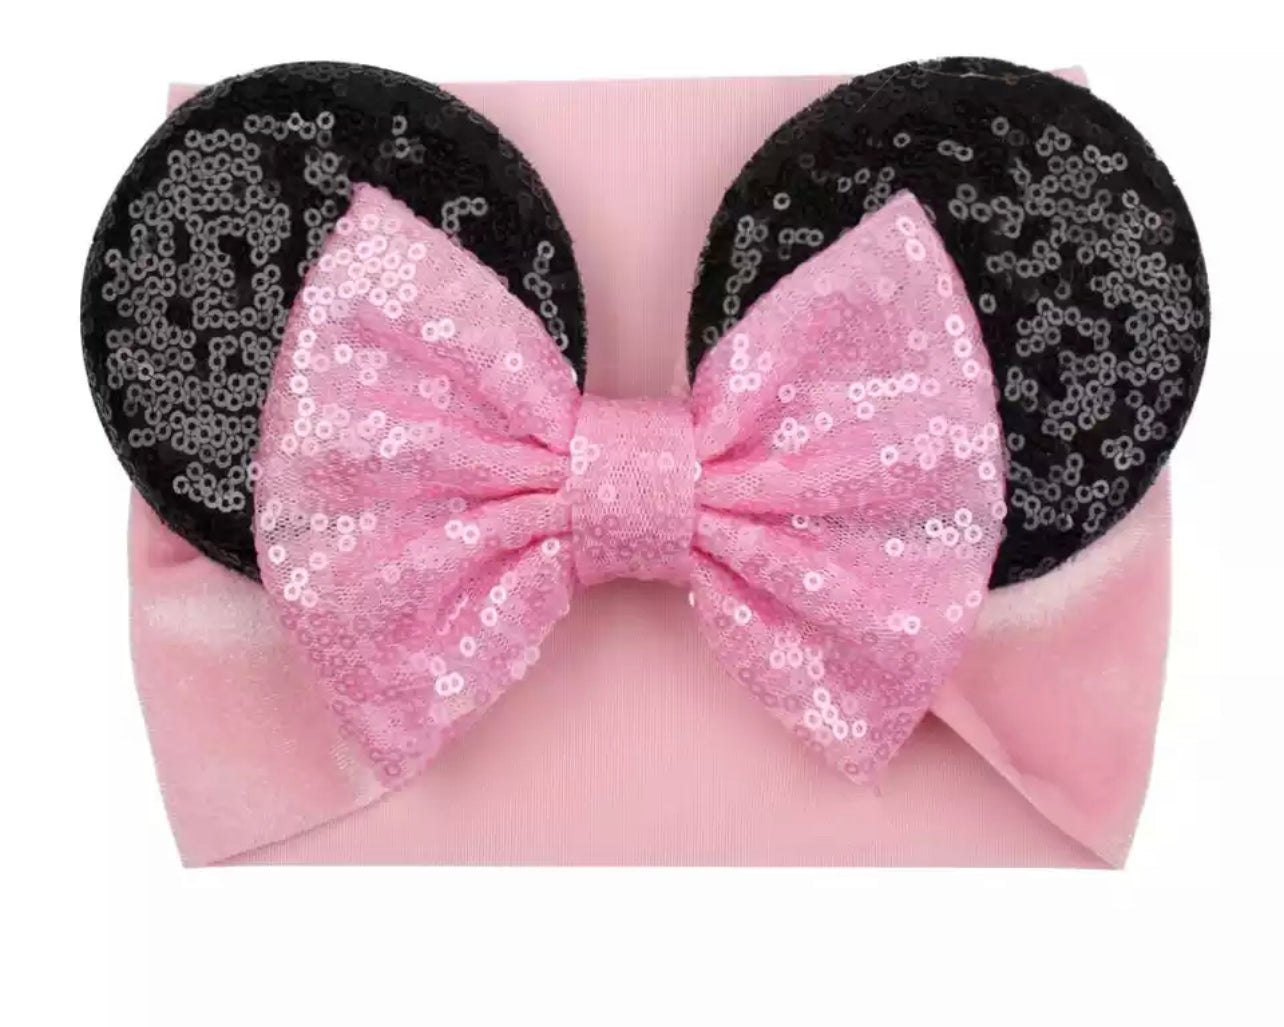 Luv Her Disney Ears - Classic Balck Thick Minnie Ears with Pink Bow - Non Slip Headband - Costume Ears - Hair - Birthday Supply - One Size Fits All